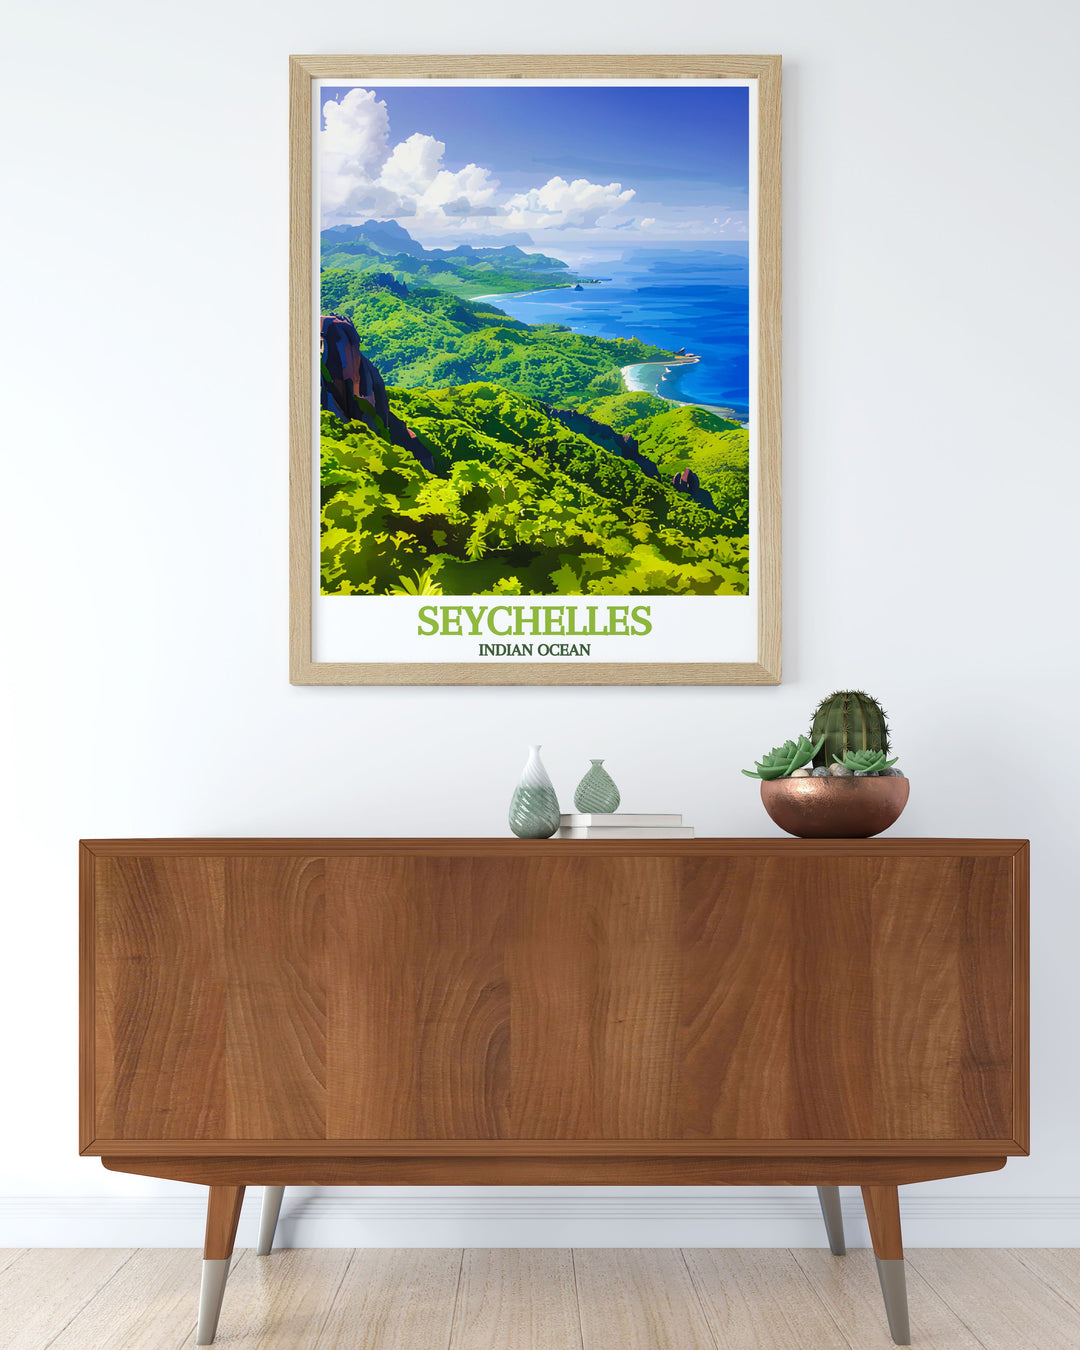 Vallée de Mai is beautifully illustrated in this poster, highlighting the dense foliage and towering palm trees, making it a stunning addition for those who dream of tropical escapes.